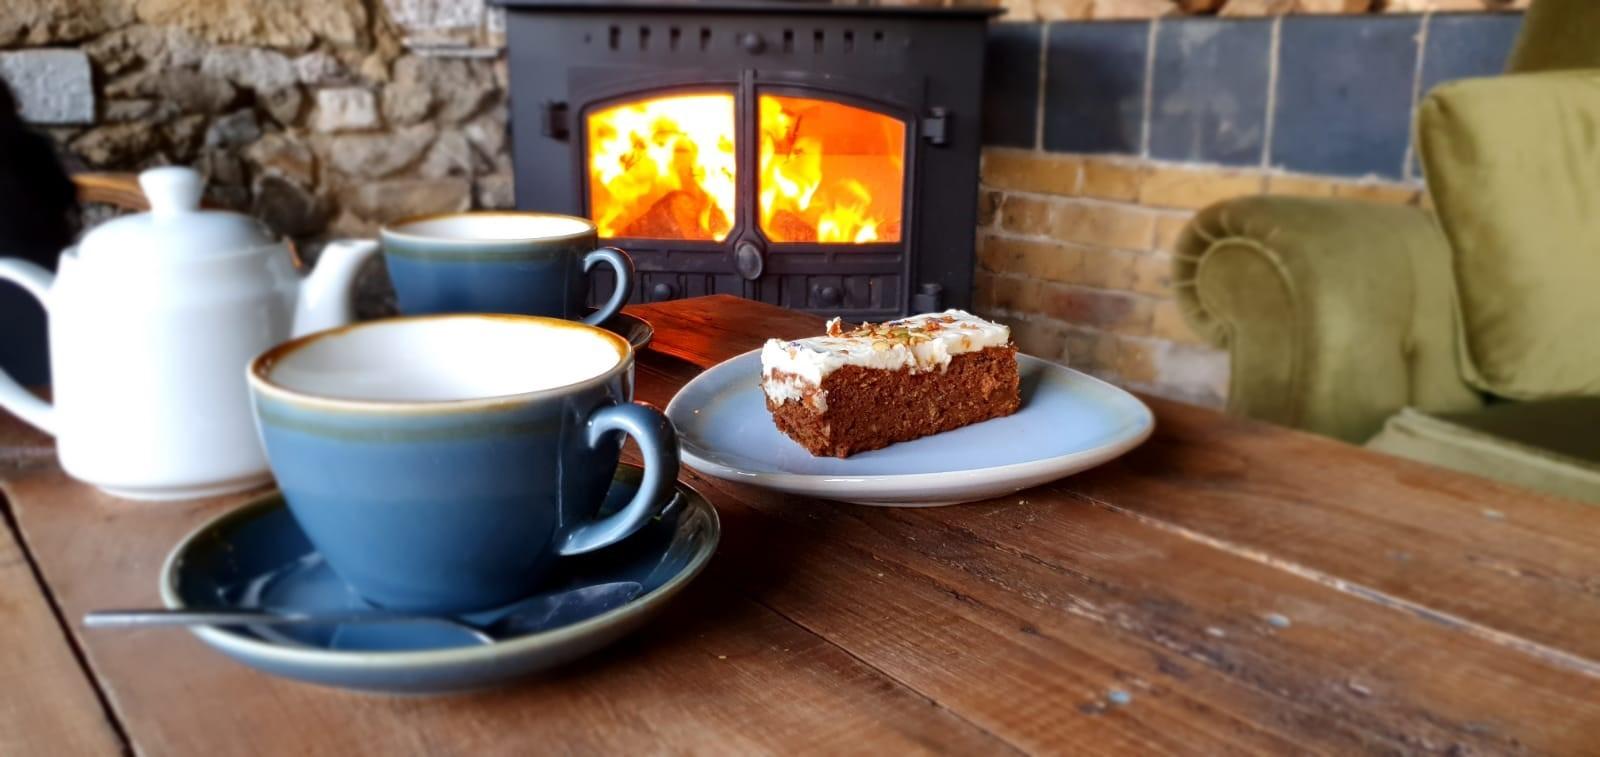 Cake and fire in the cowshed cafe